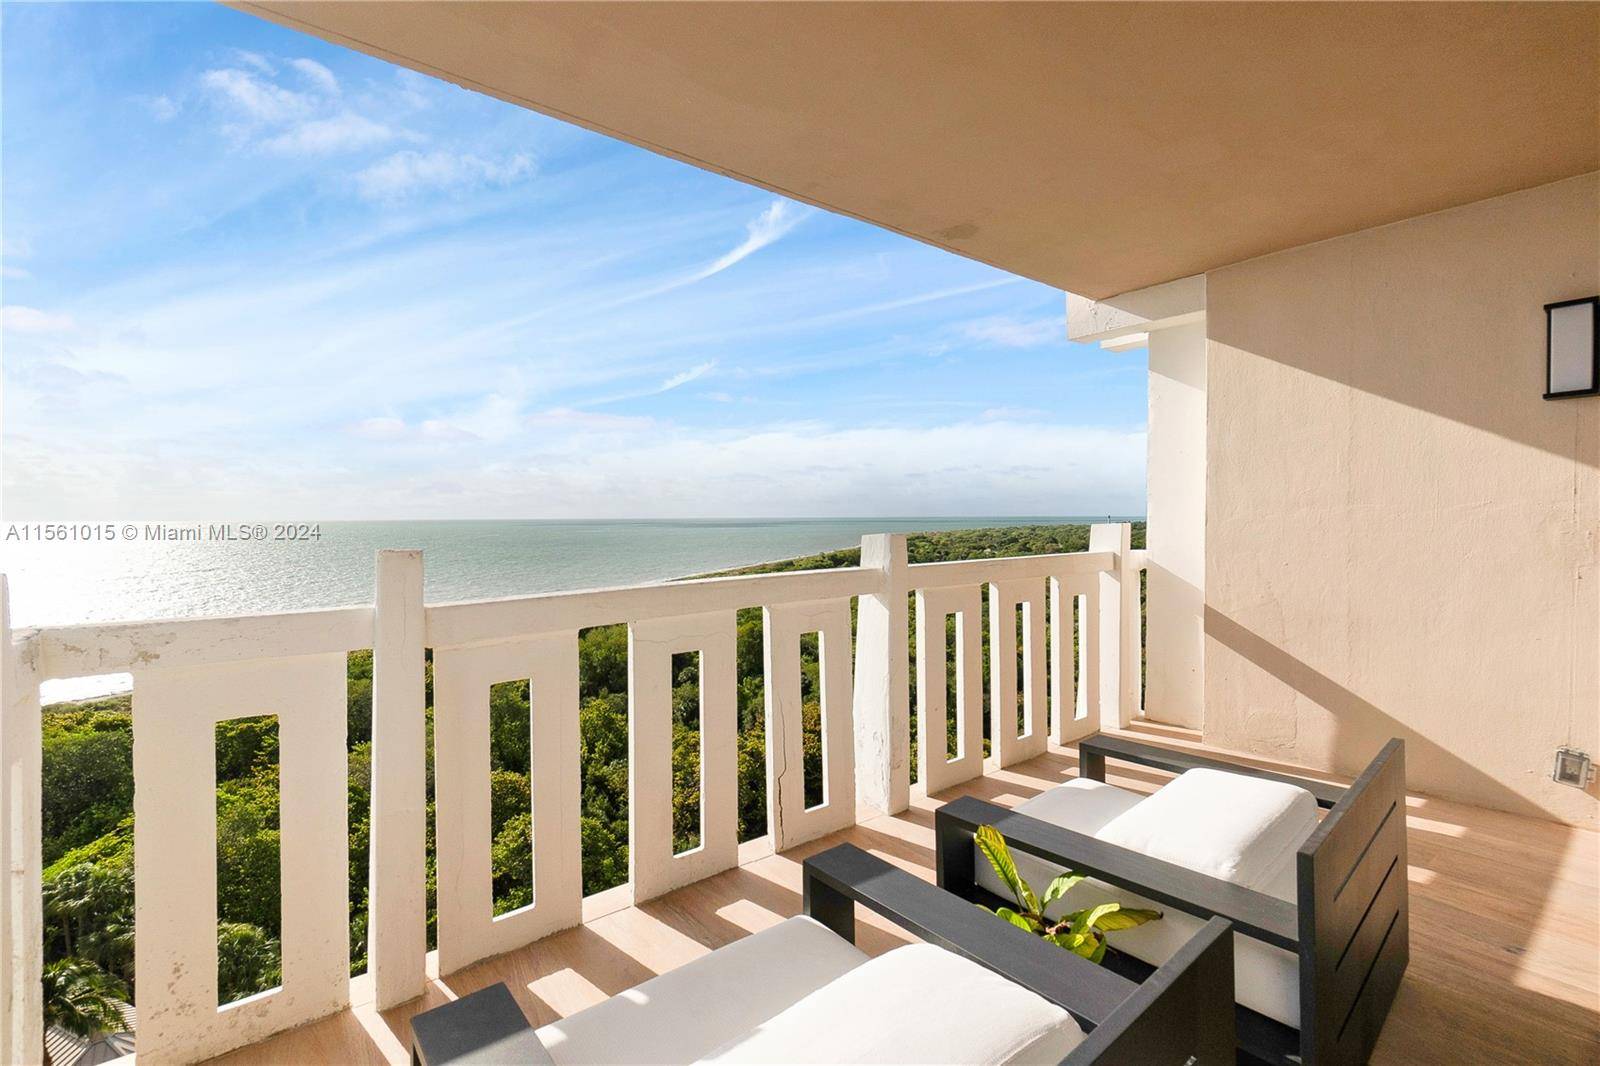 Stunning Ocean State Park Views from this tastefully remodeled 07 line corner penthouse unit at the Towers of Key Biscayne.